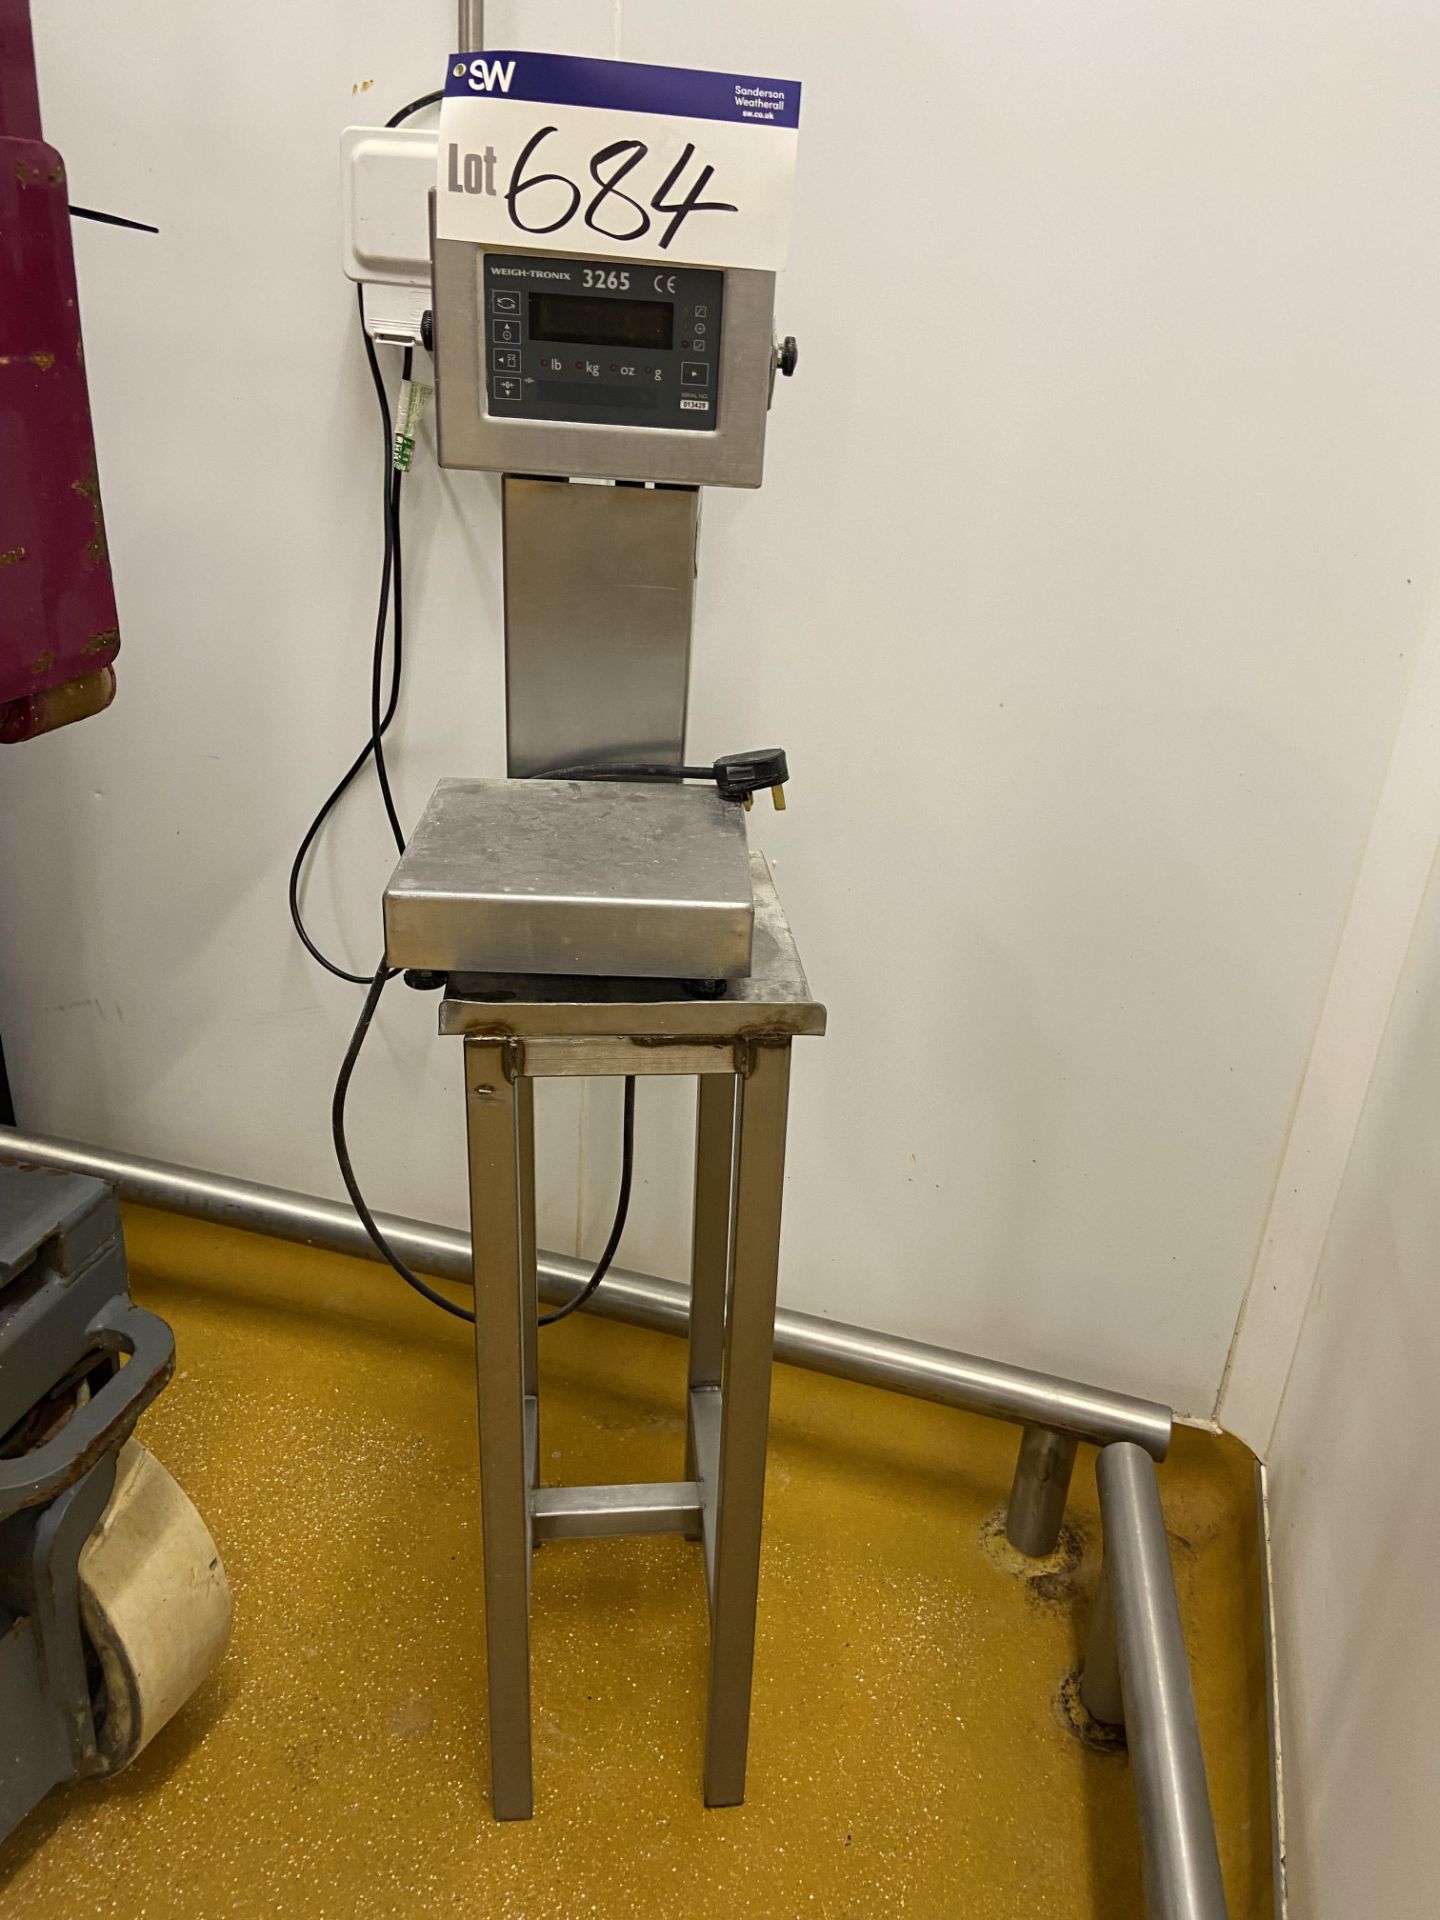 Weigh-tronix 3265 Stainless Steel Benchtop Platform Scales, with stainless steel table, 240VPlease